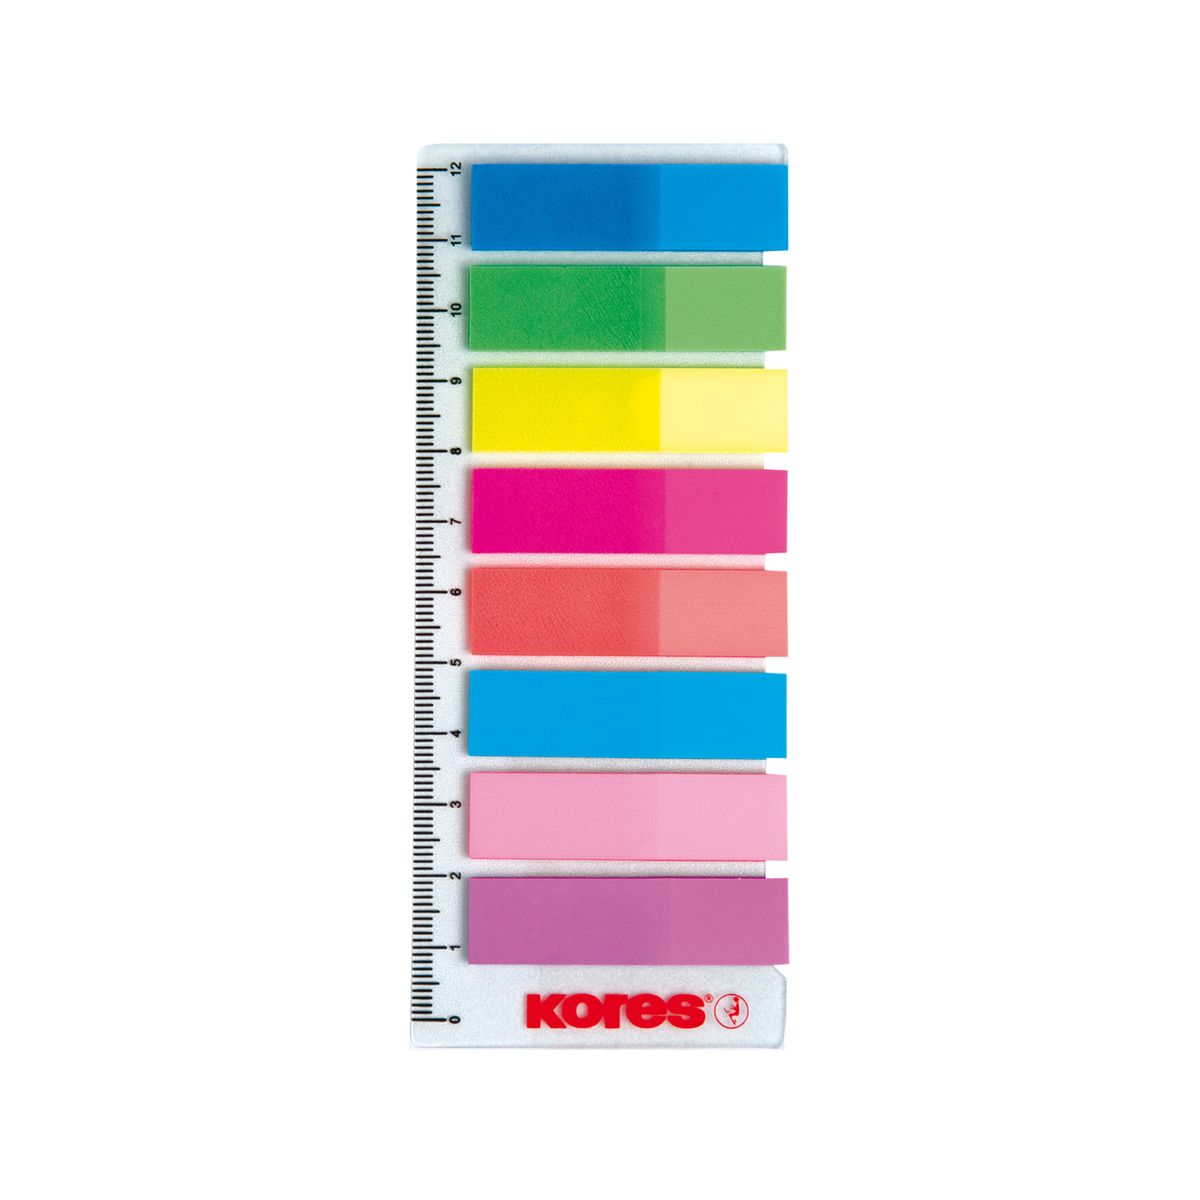 TTO Adhesive Marker PP 12 x 45 mm 5 x 25 mm Sheets Neon Mix